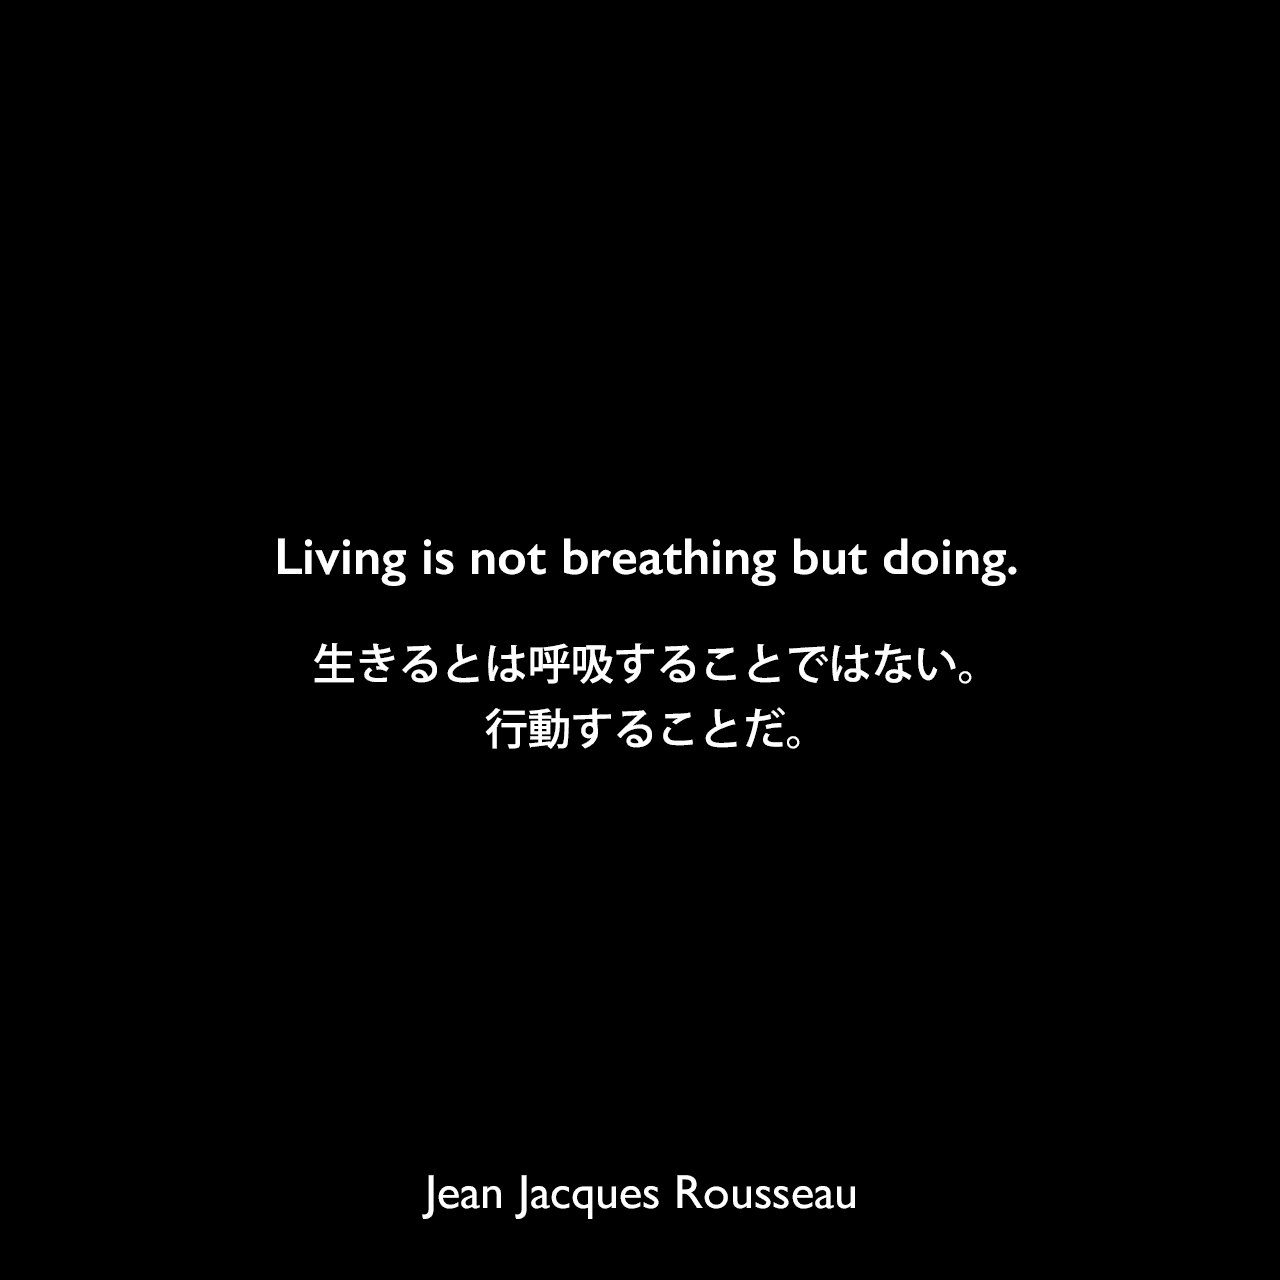 Living is not breathing but doing.生きるとは呼吸することではない。行動することだ。Jean Jacques Rousseau